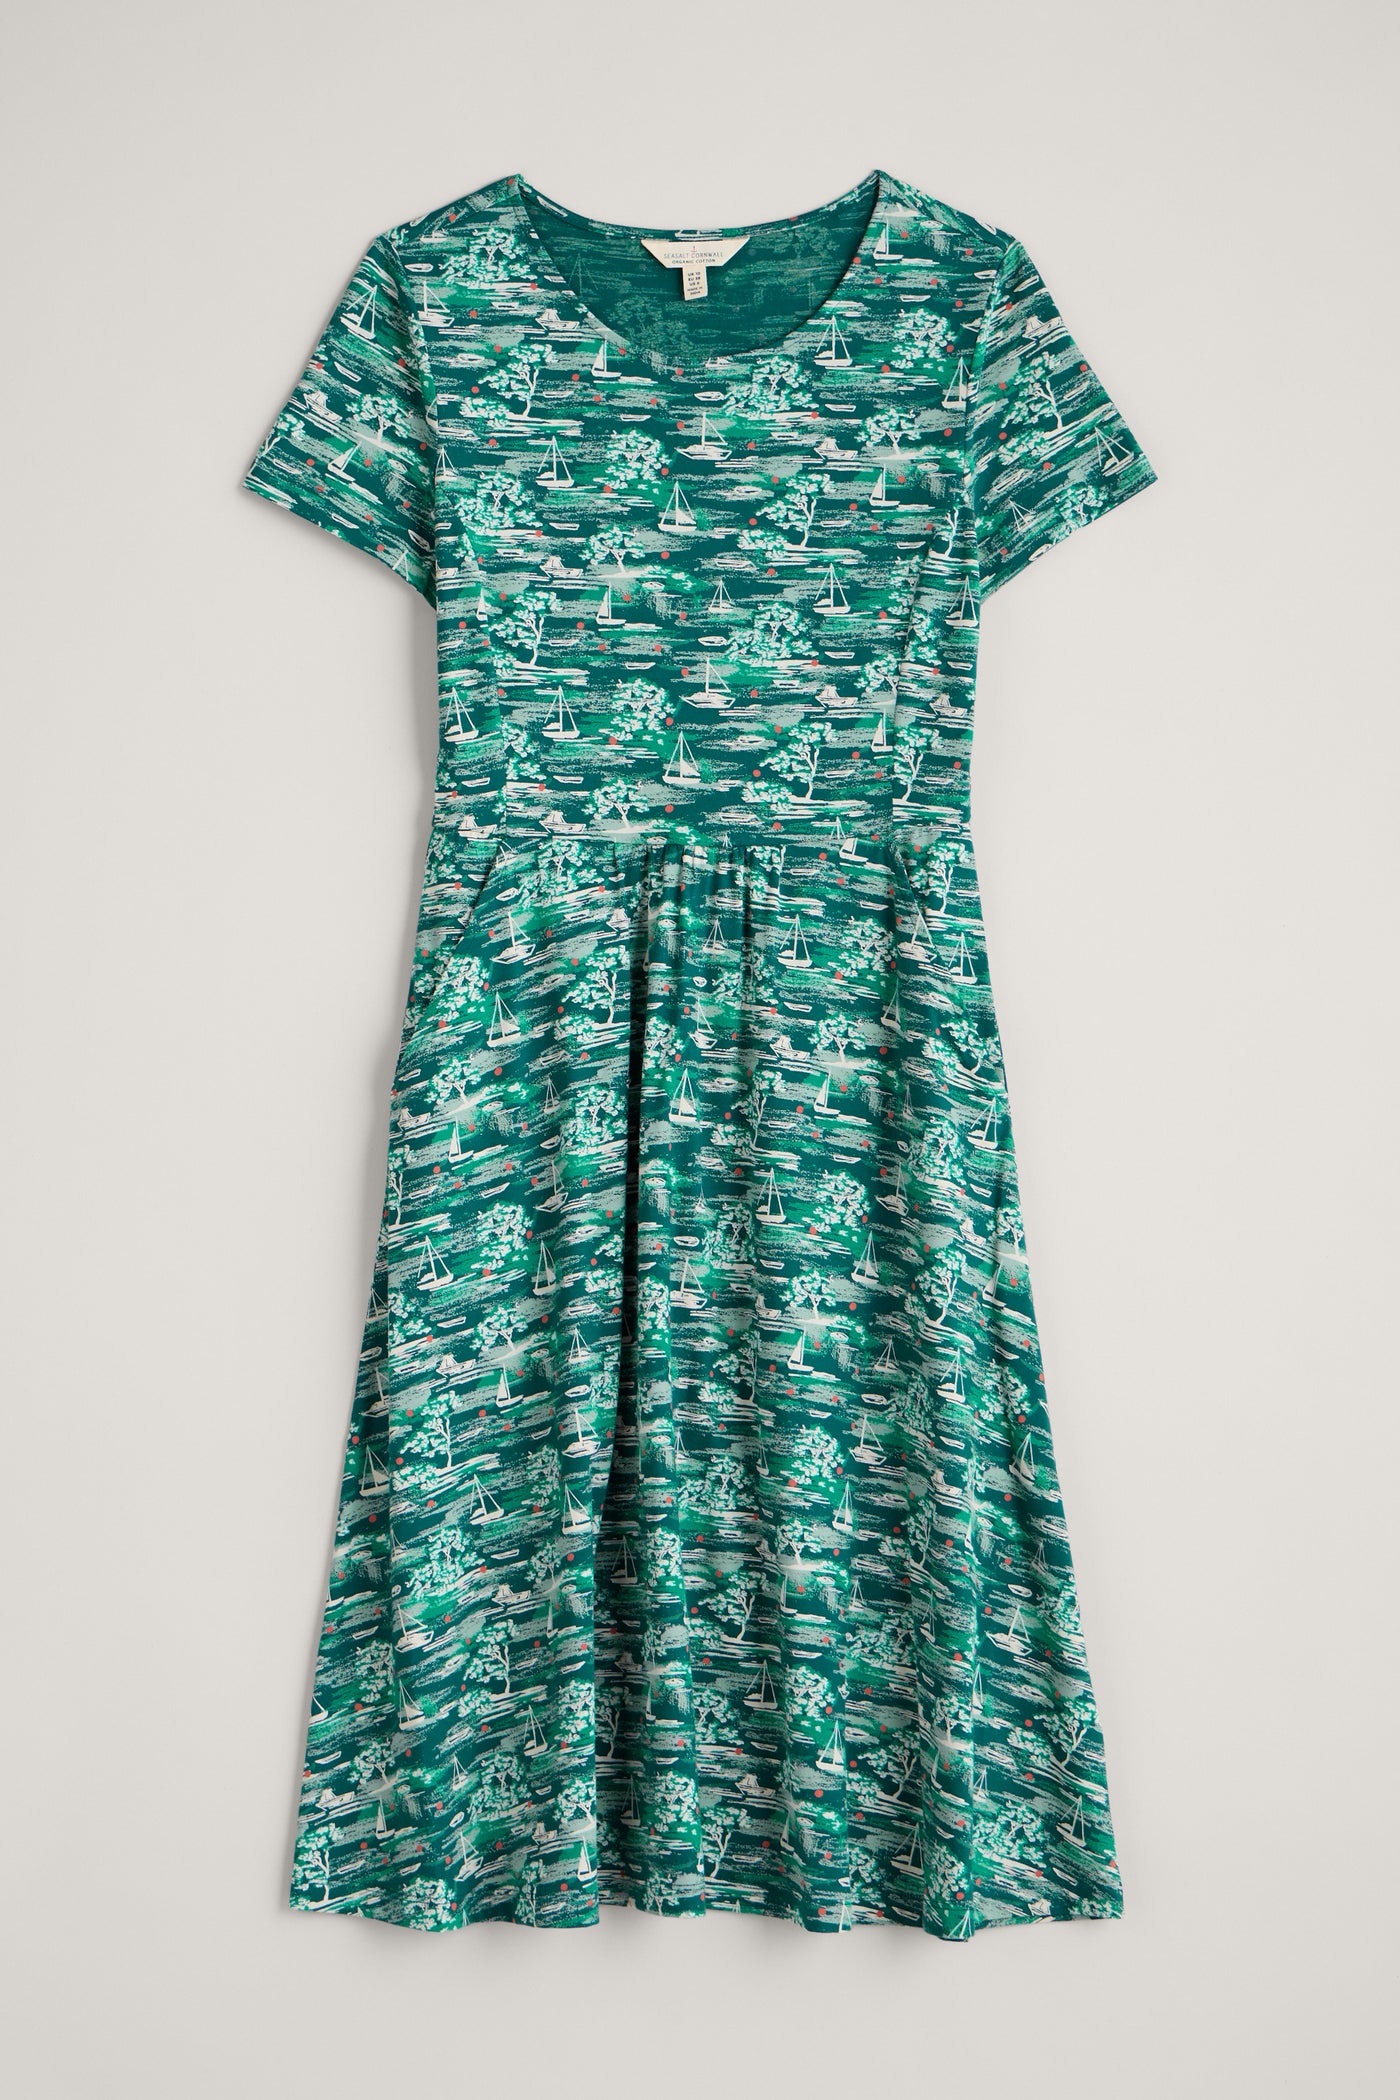 Seasalt S/S April Dress - Helford Boats Dark Wreckage-Womens-Ohh! By Gum - Shop Sustainable